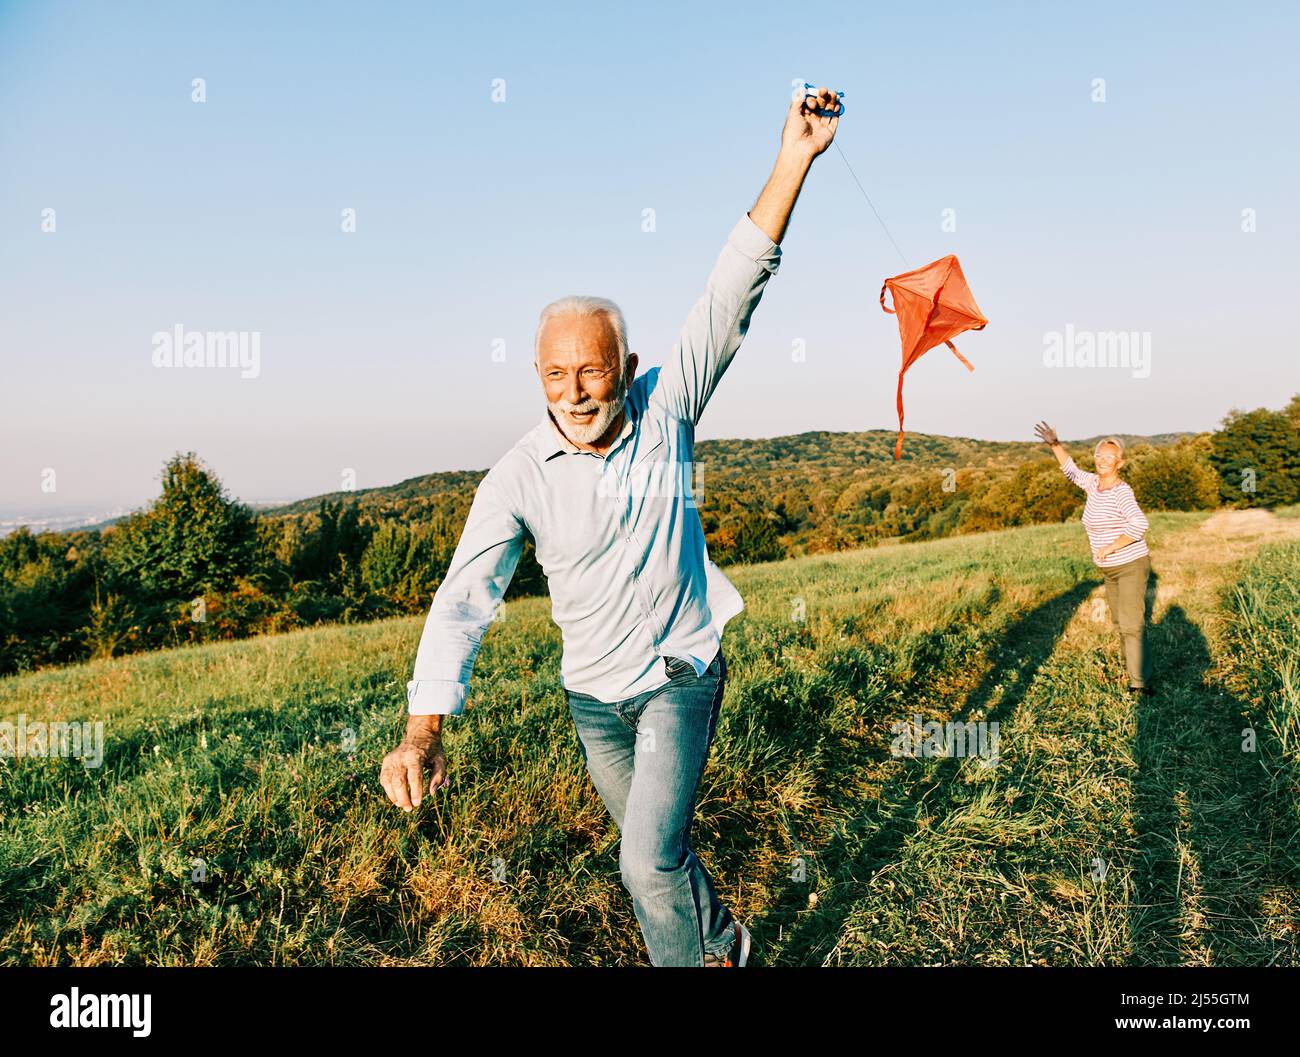 woman man outdoor senior couple happy lifestyle retirement together smiling love kite run nature mature Stock Photo